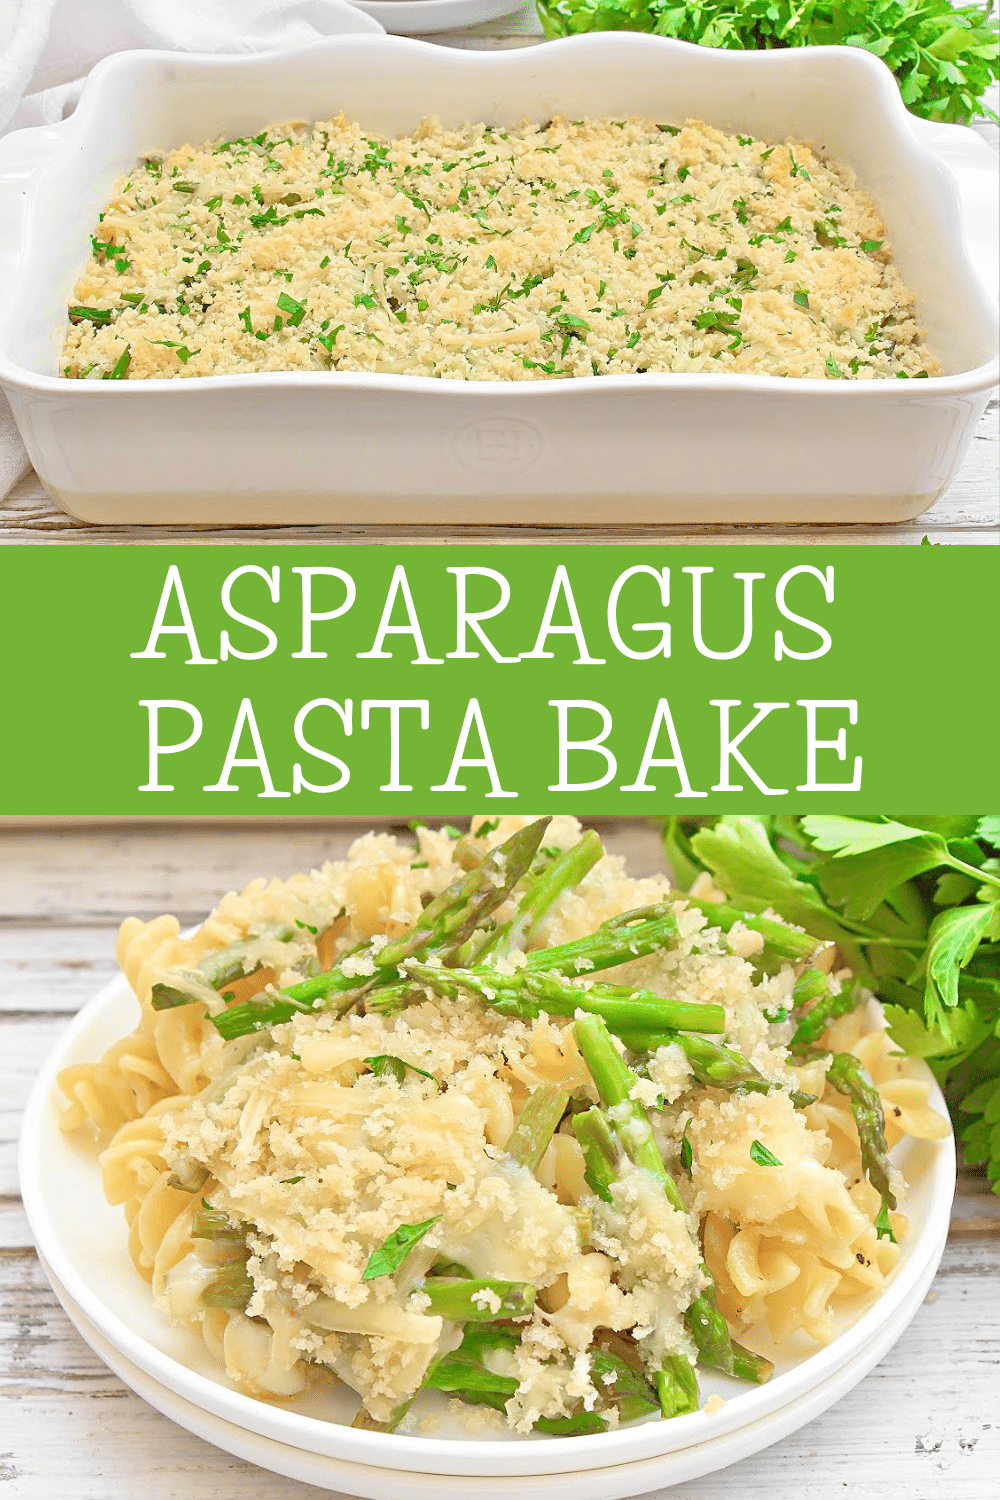 Asparagus Pasta Bake ~ Fresh asparagus spears mixed with al dente pasta, dairy-free cheese, and breadcrumbs, then baked to golden perfection! via @thiswifecooks